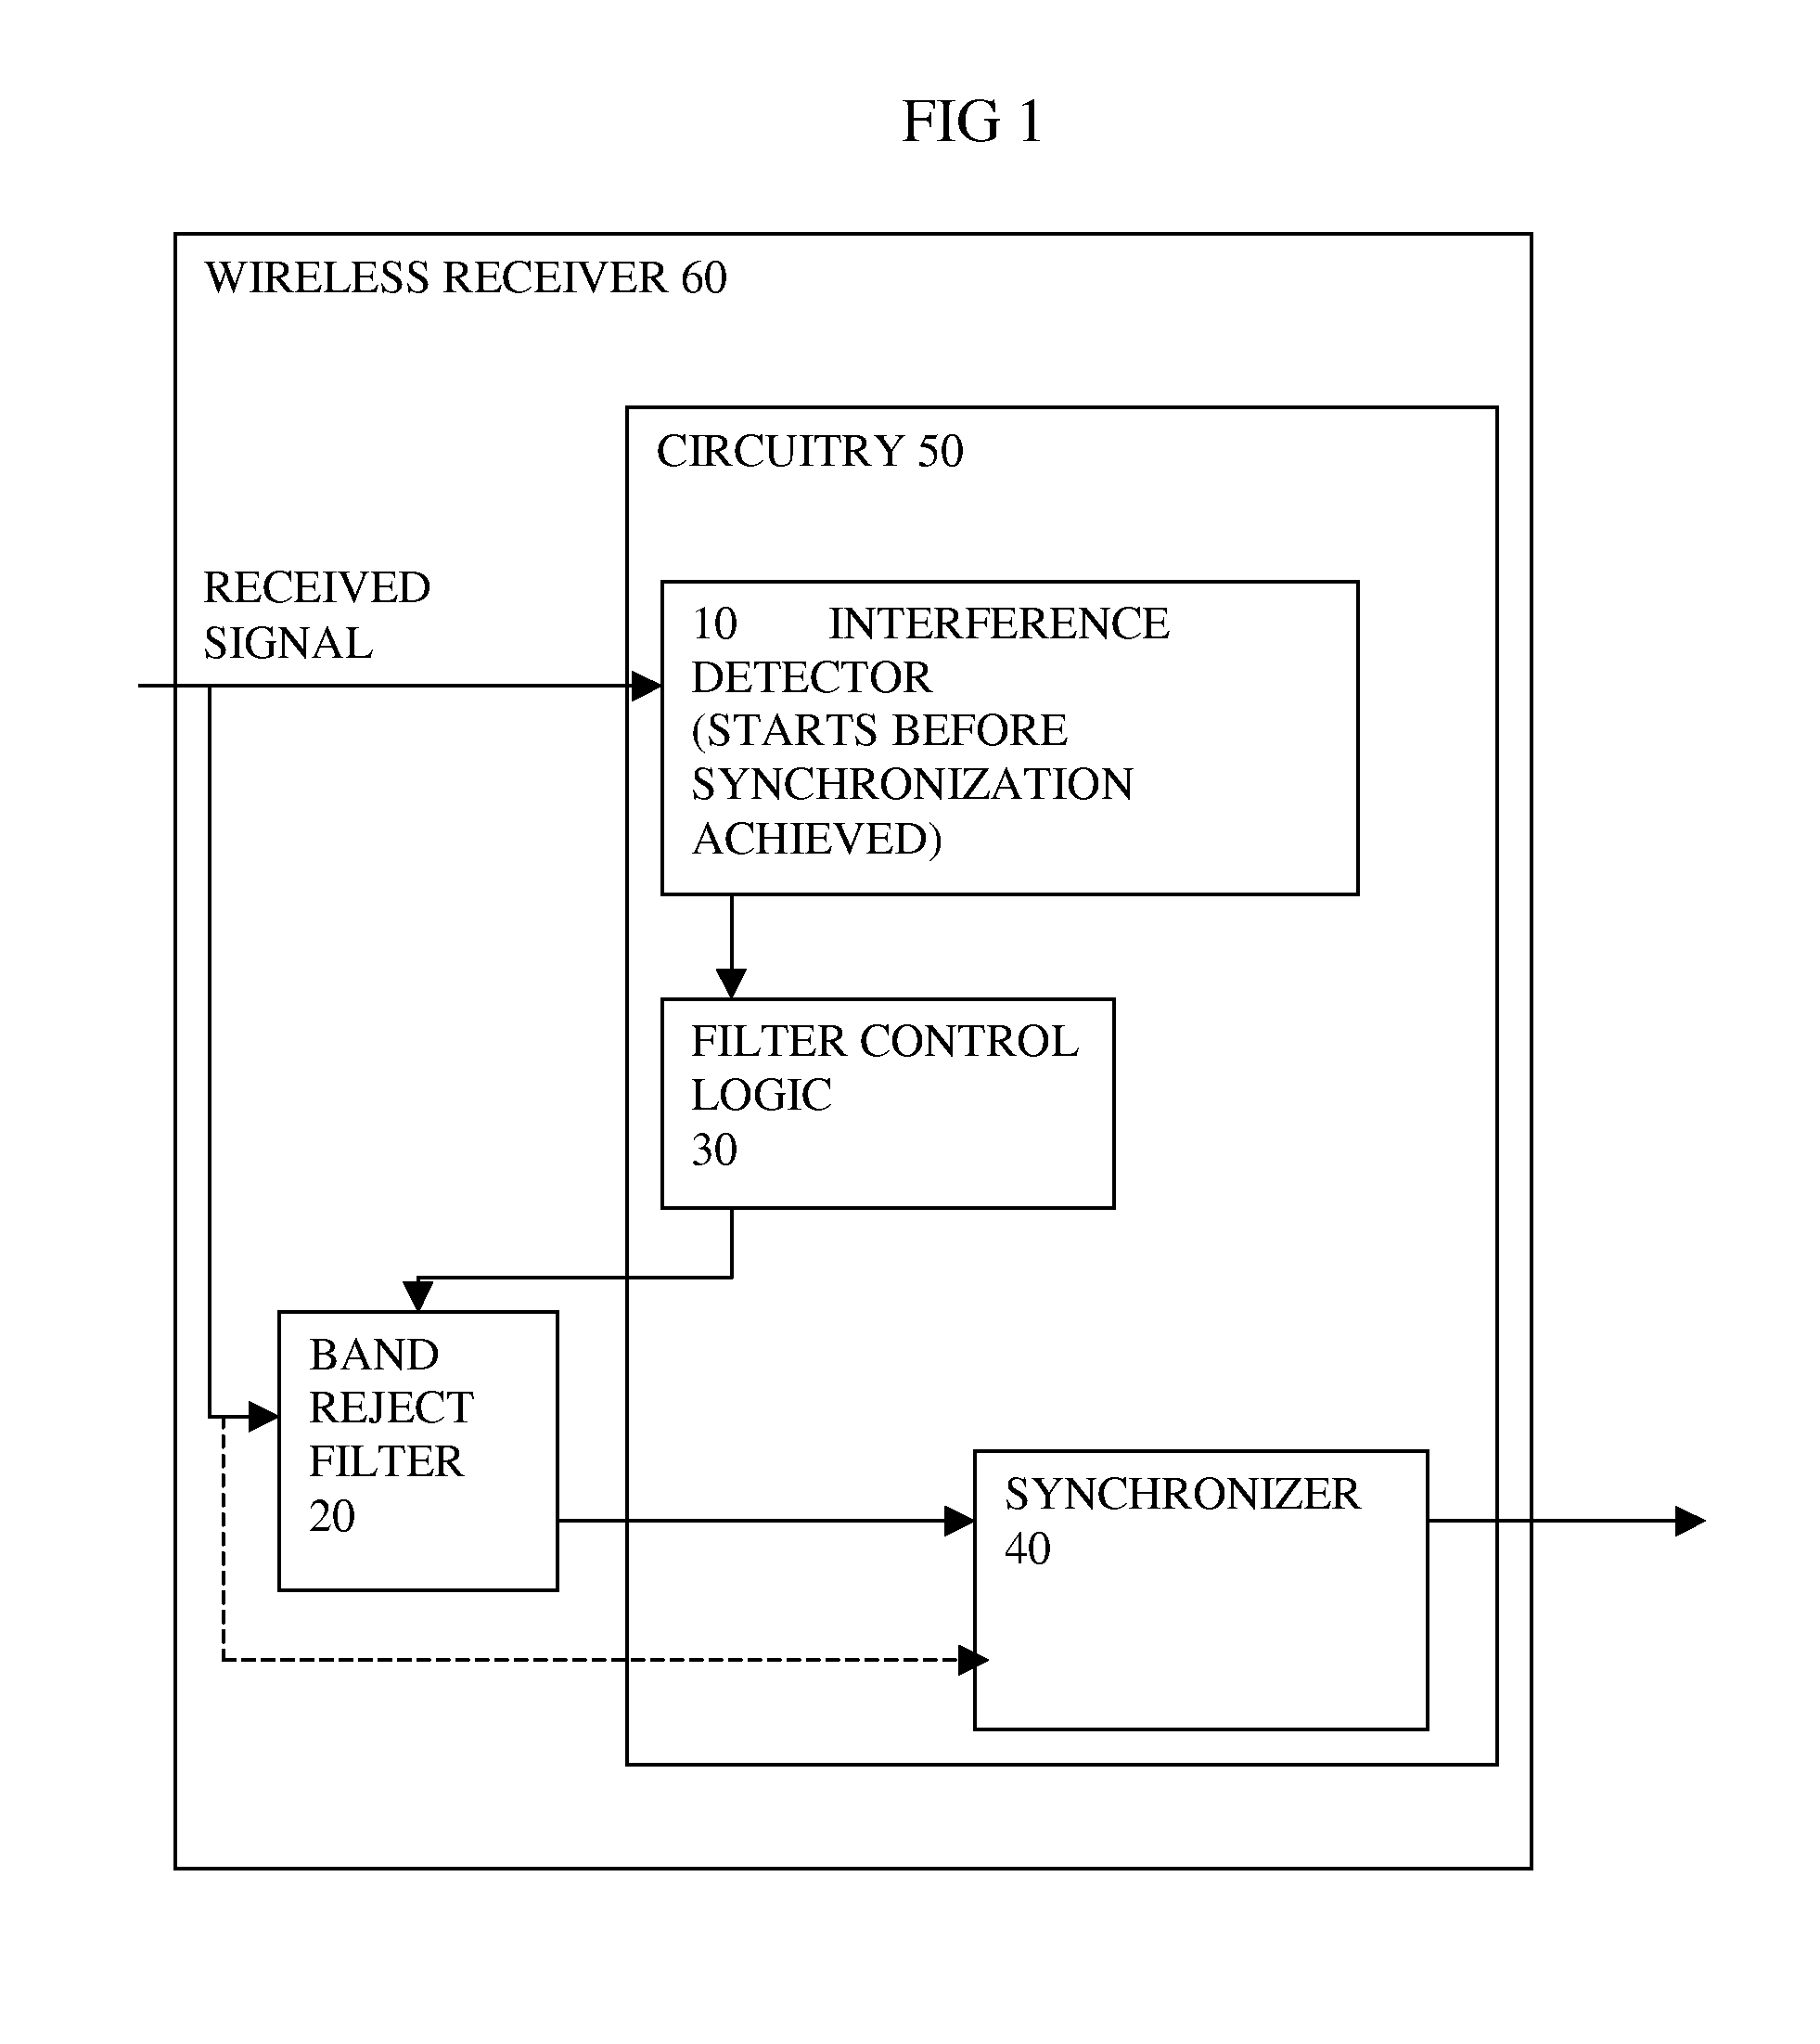 Synchronizing and Detecting Interference in Wireless Receiver